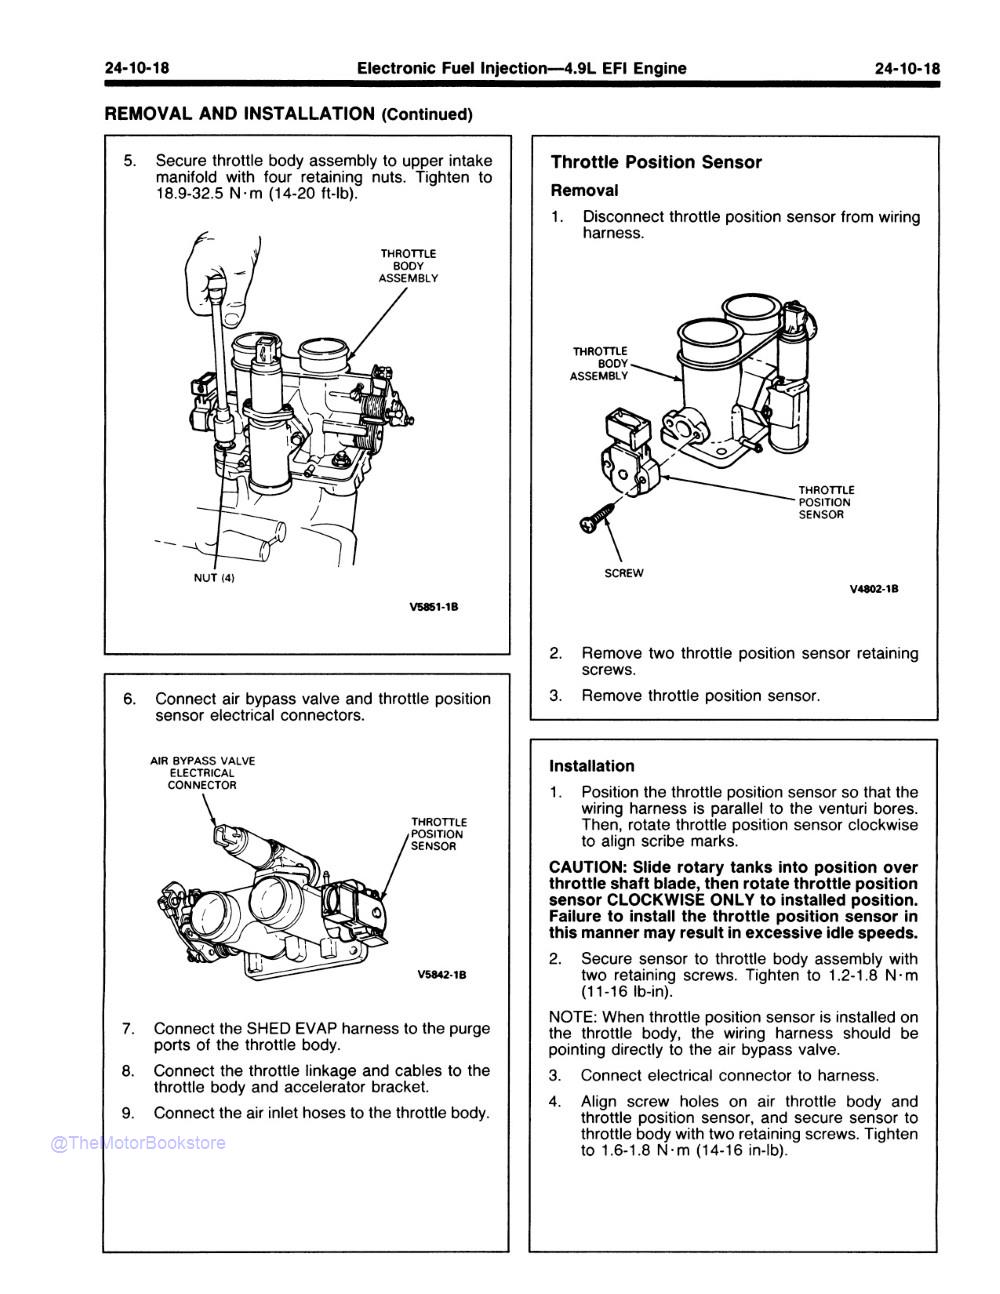 1988 Ford F-Series Truck, Bronco, & Econoline Shop Manuals - Sample Page 3